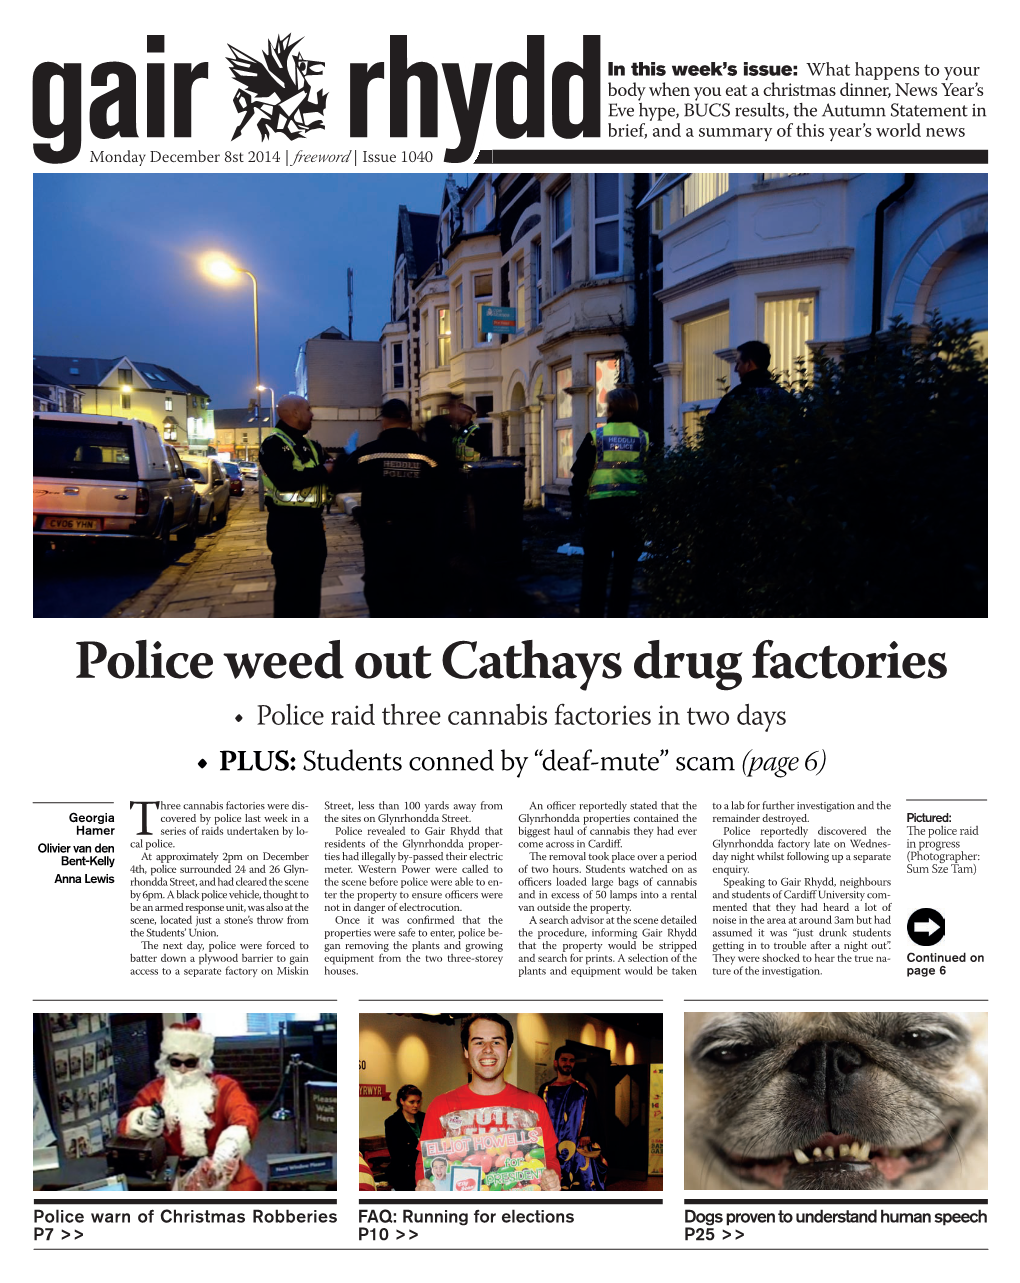 Police Weed out Cathays Drug Factories • Police Raid Three Cannabis Factories in Two Days • PLUS: Students Conned by “Deaf-Mute” Scam (Page 6)